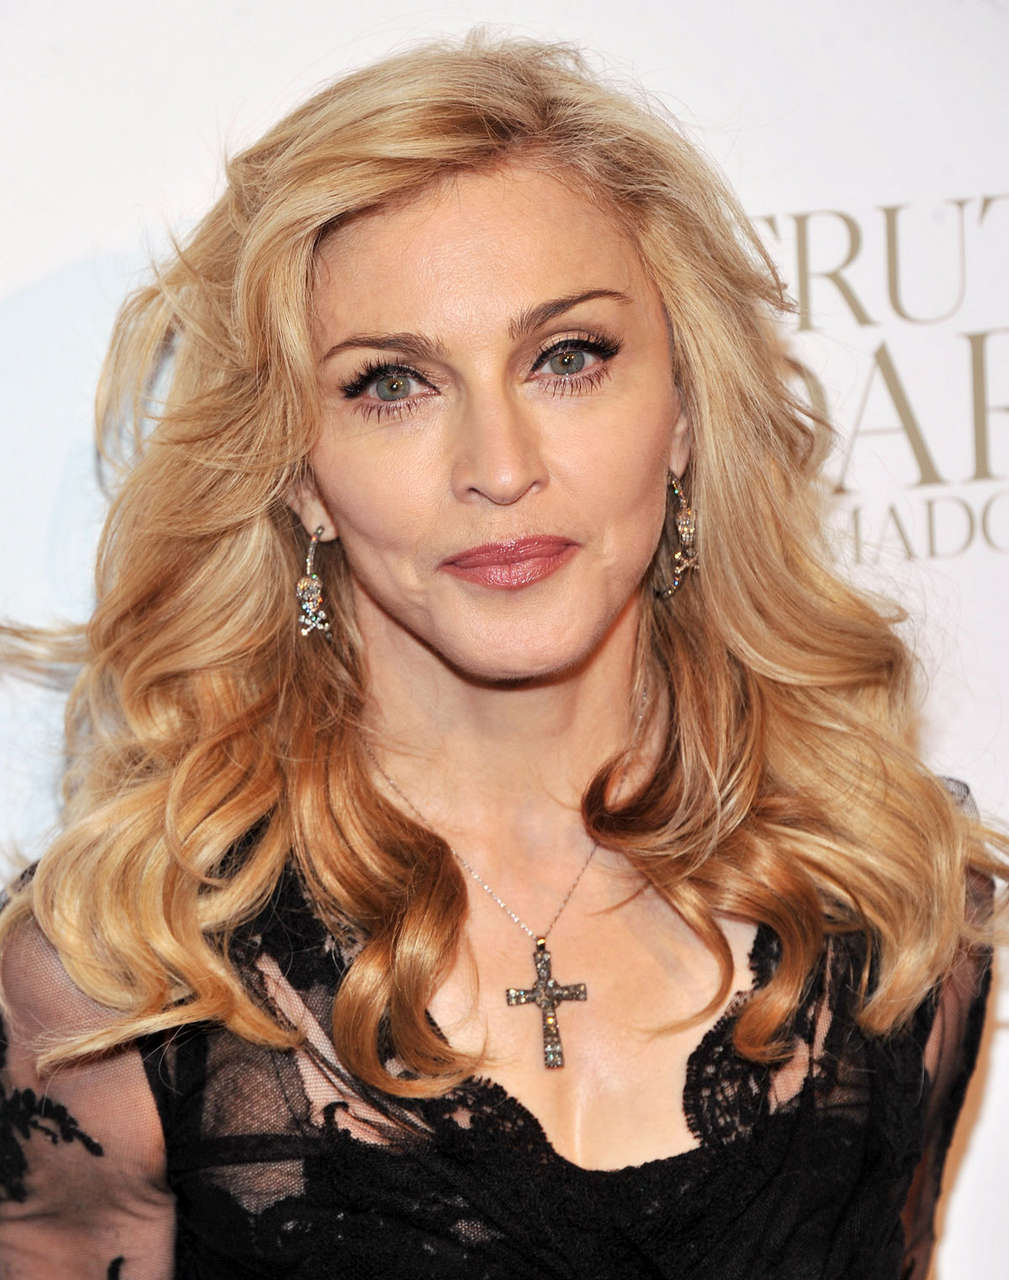 Madonna Truth Or Dare By Madonna Fragrance Launch Macys Herald Square New York